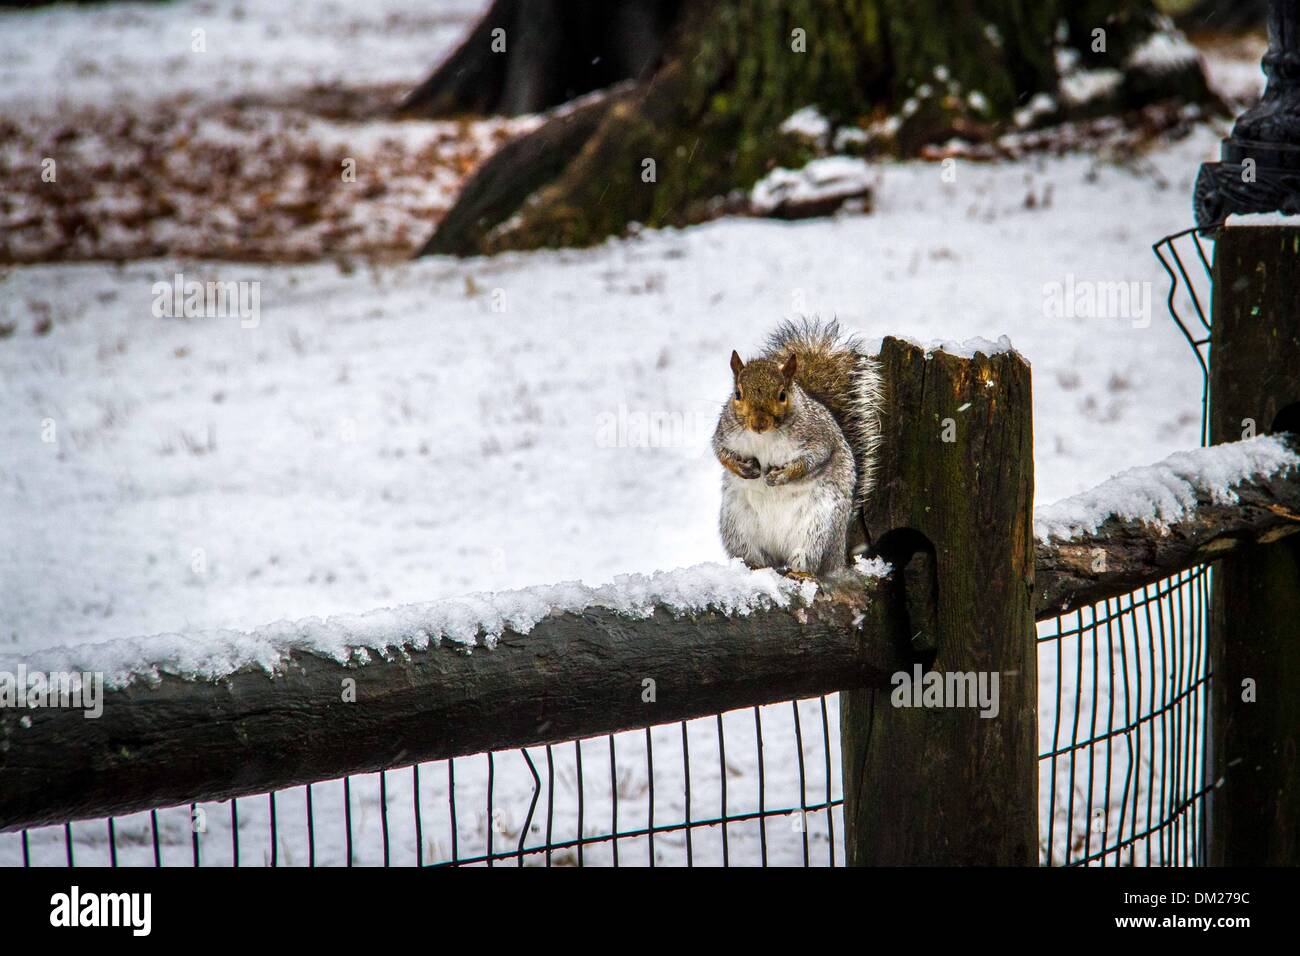 New York, USA. 10th Dec, 2013. A squirrel stands on a fence during a snowfall in Central Park, New York City, United States, on Dec. 10, 2013. Credit:  Niu Xiaolei/Xinhua/Alamy Live News Stock Photo